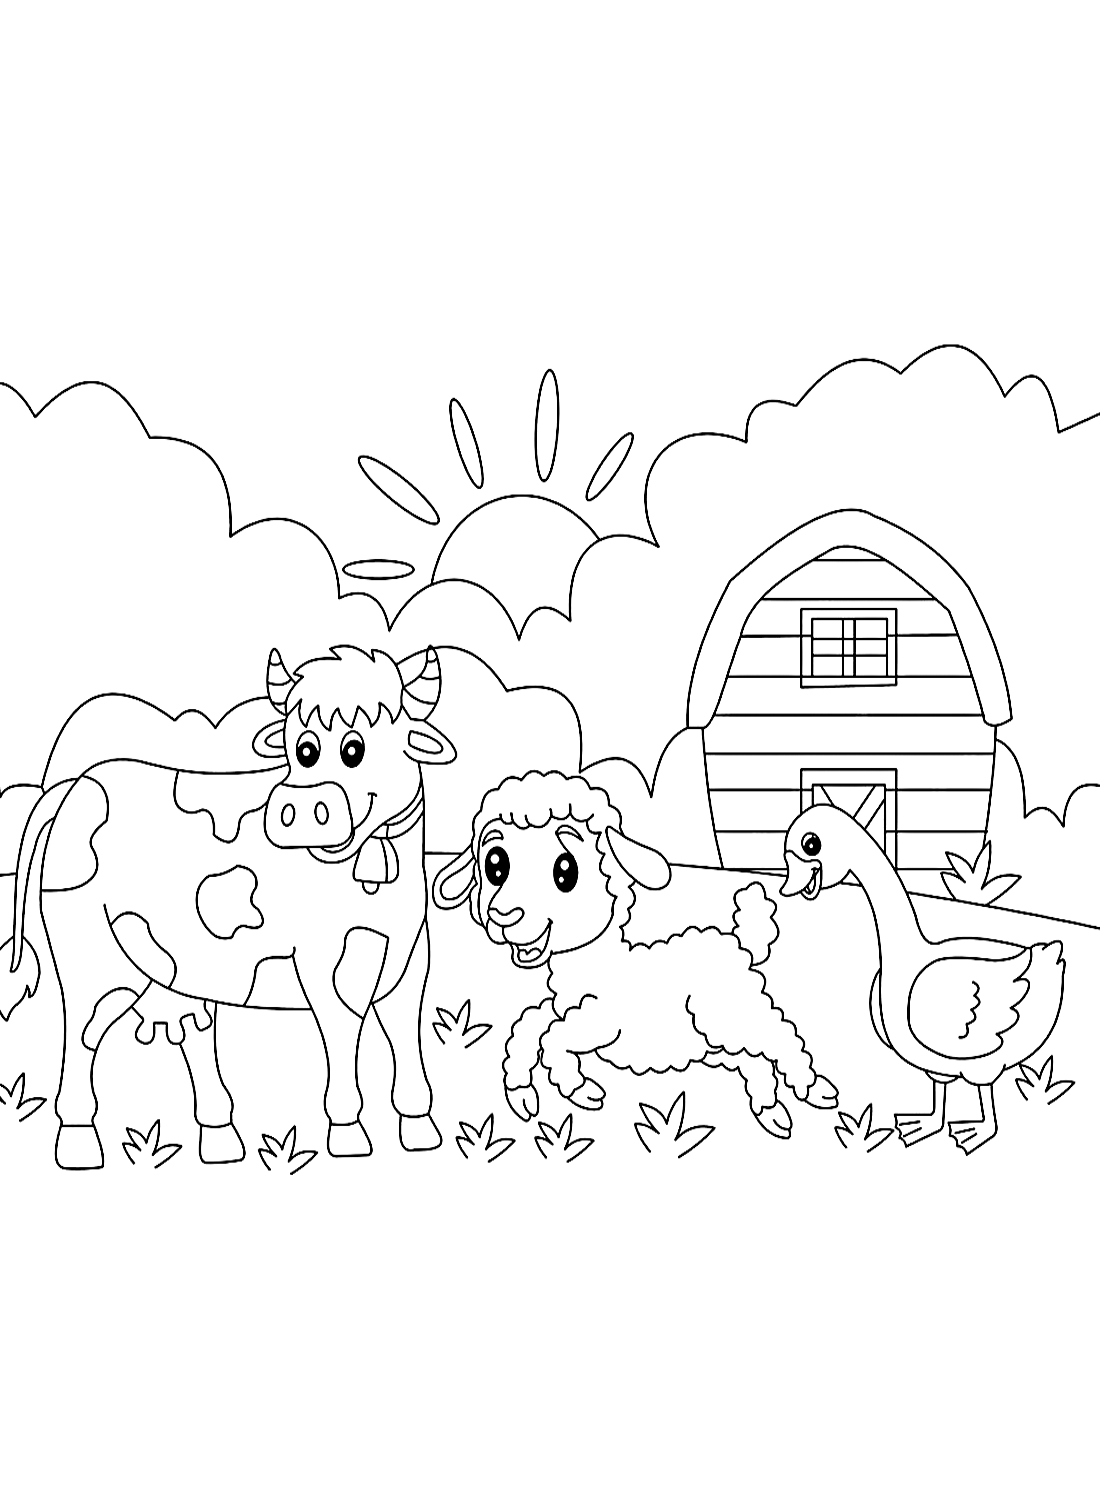 Coloring Page of Cow in The Farm